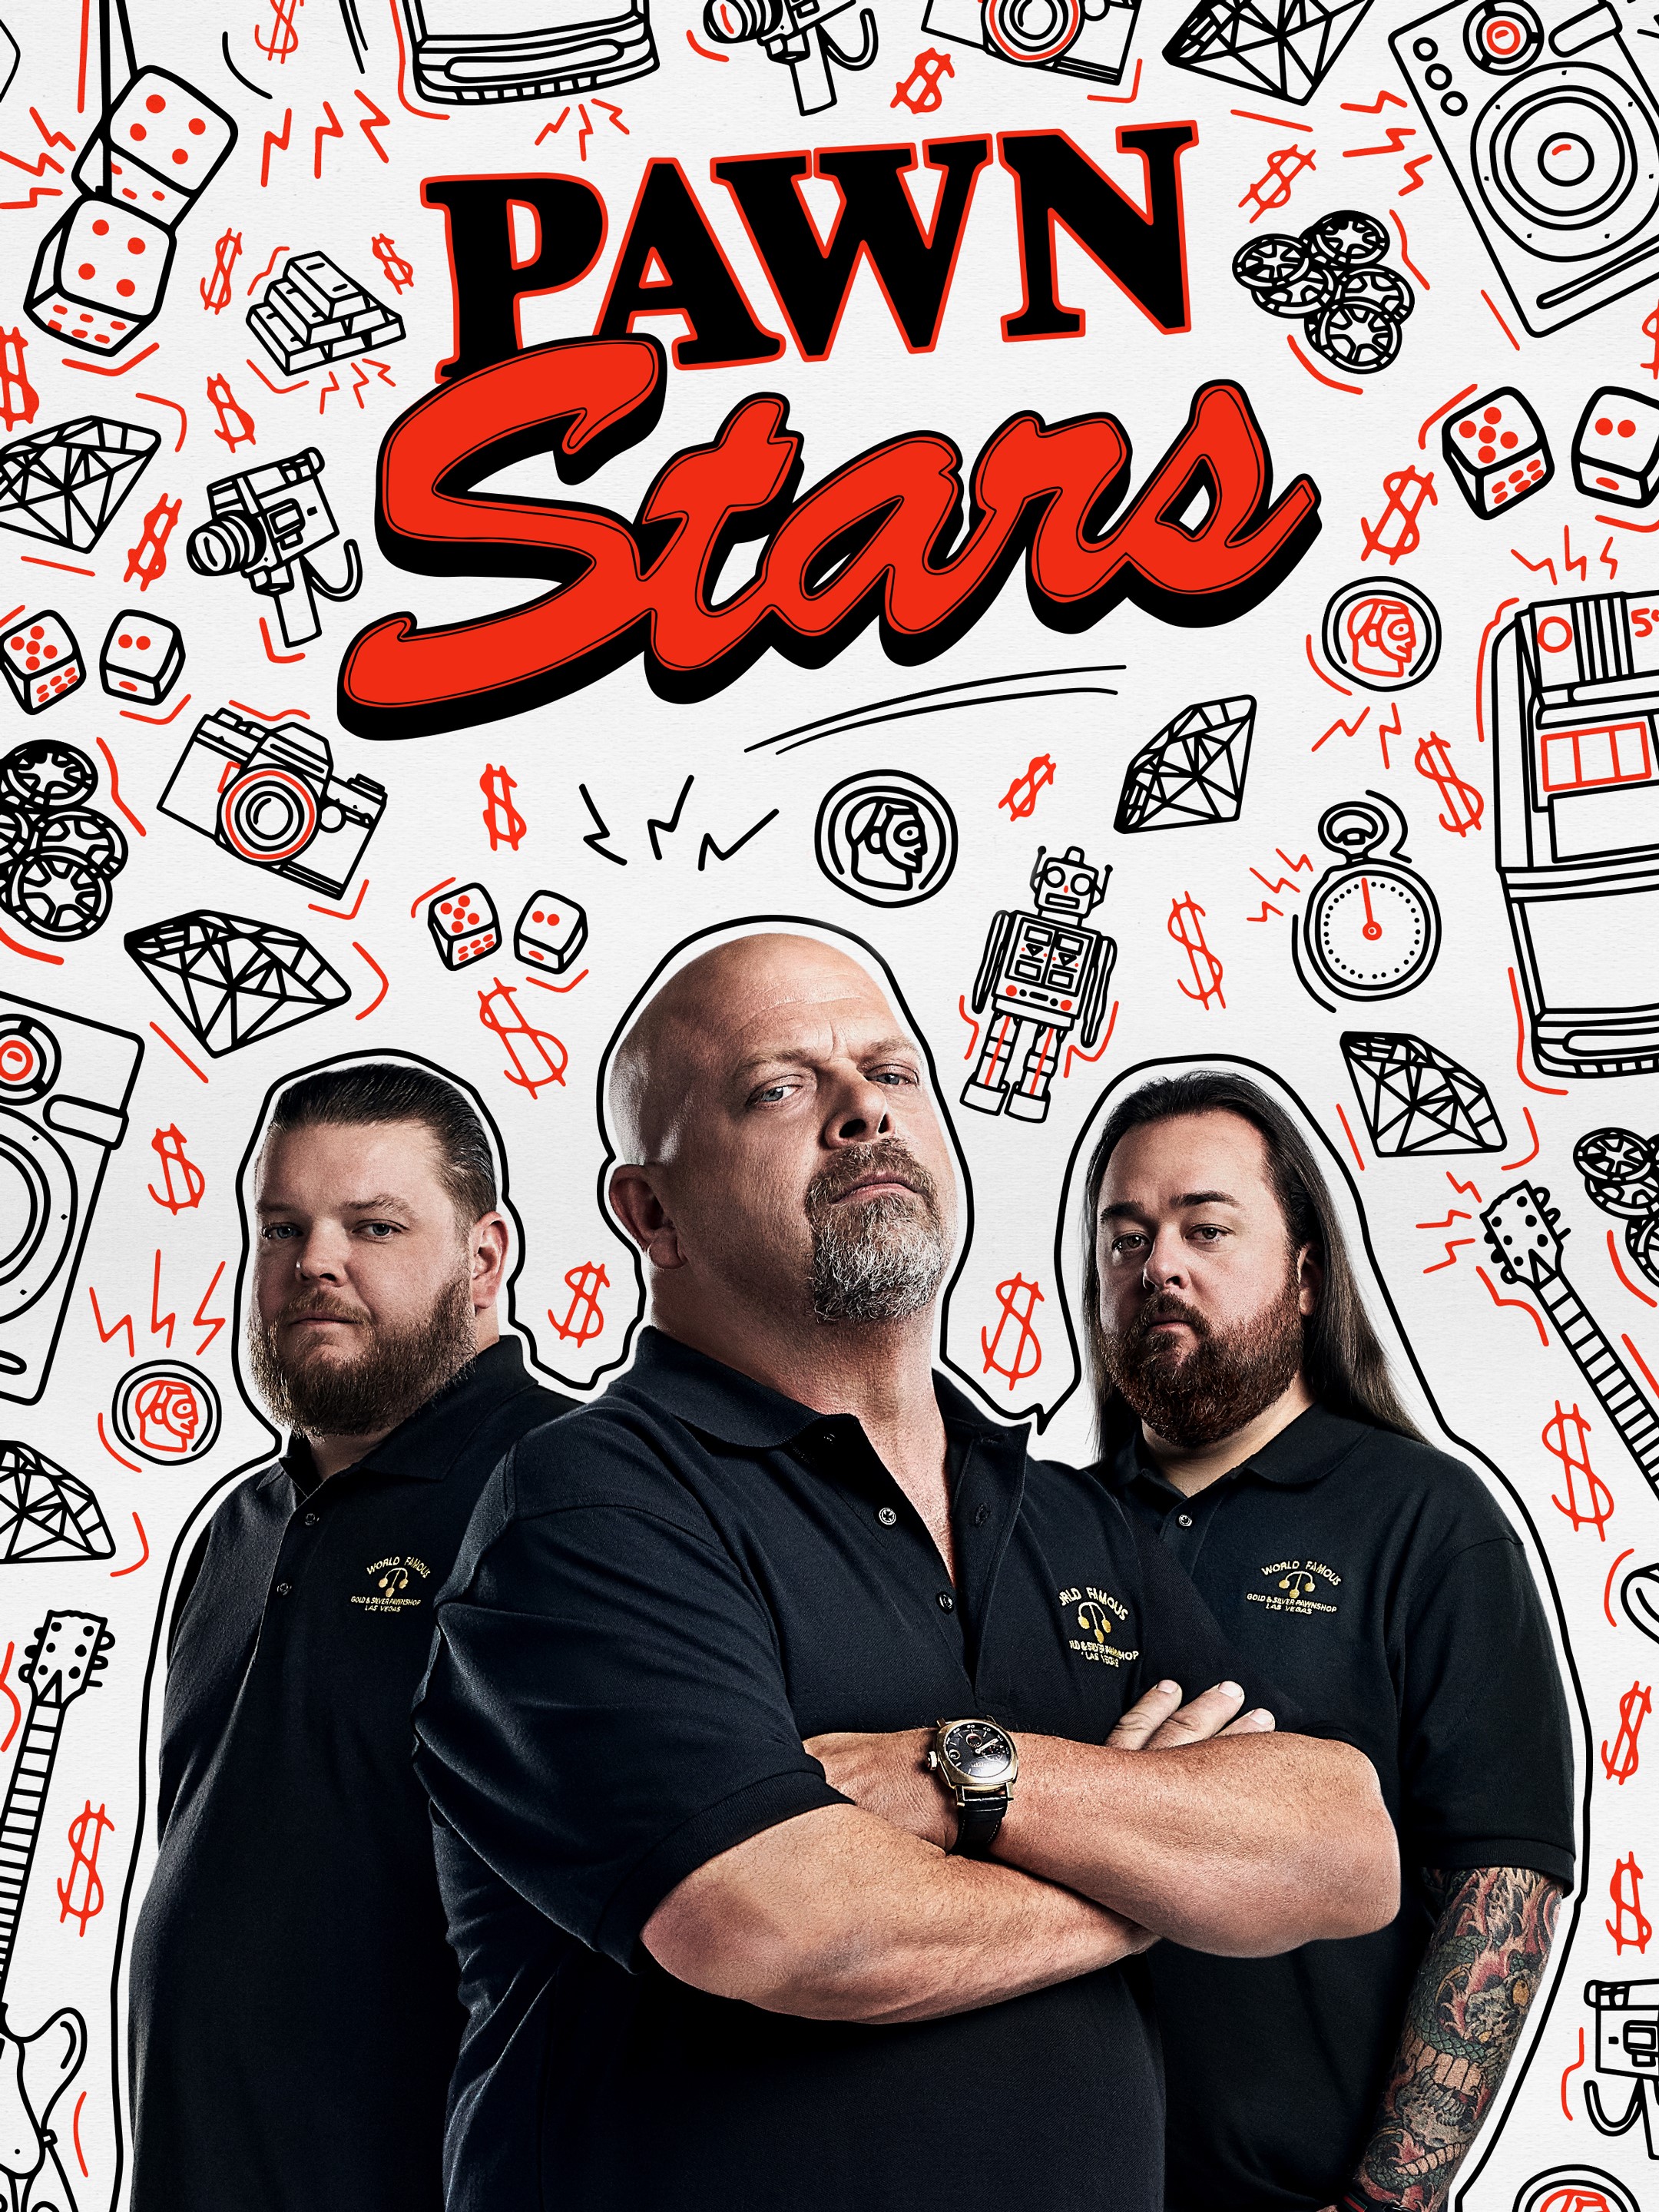 how to get more candy on pawn stars game